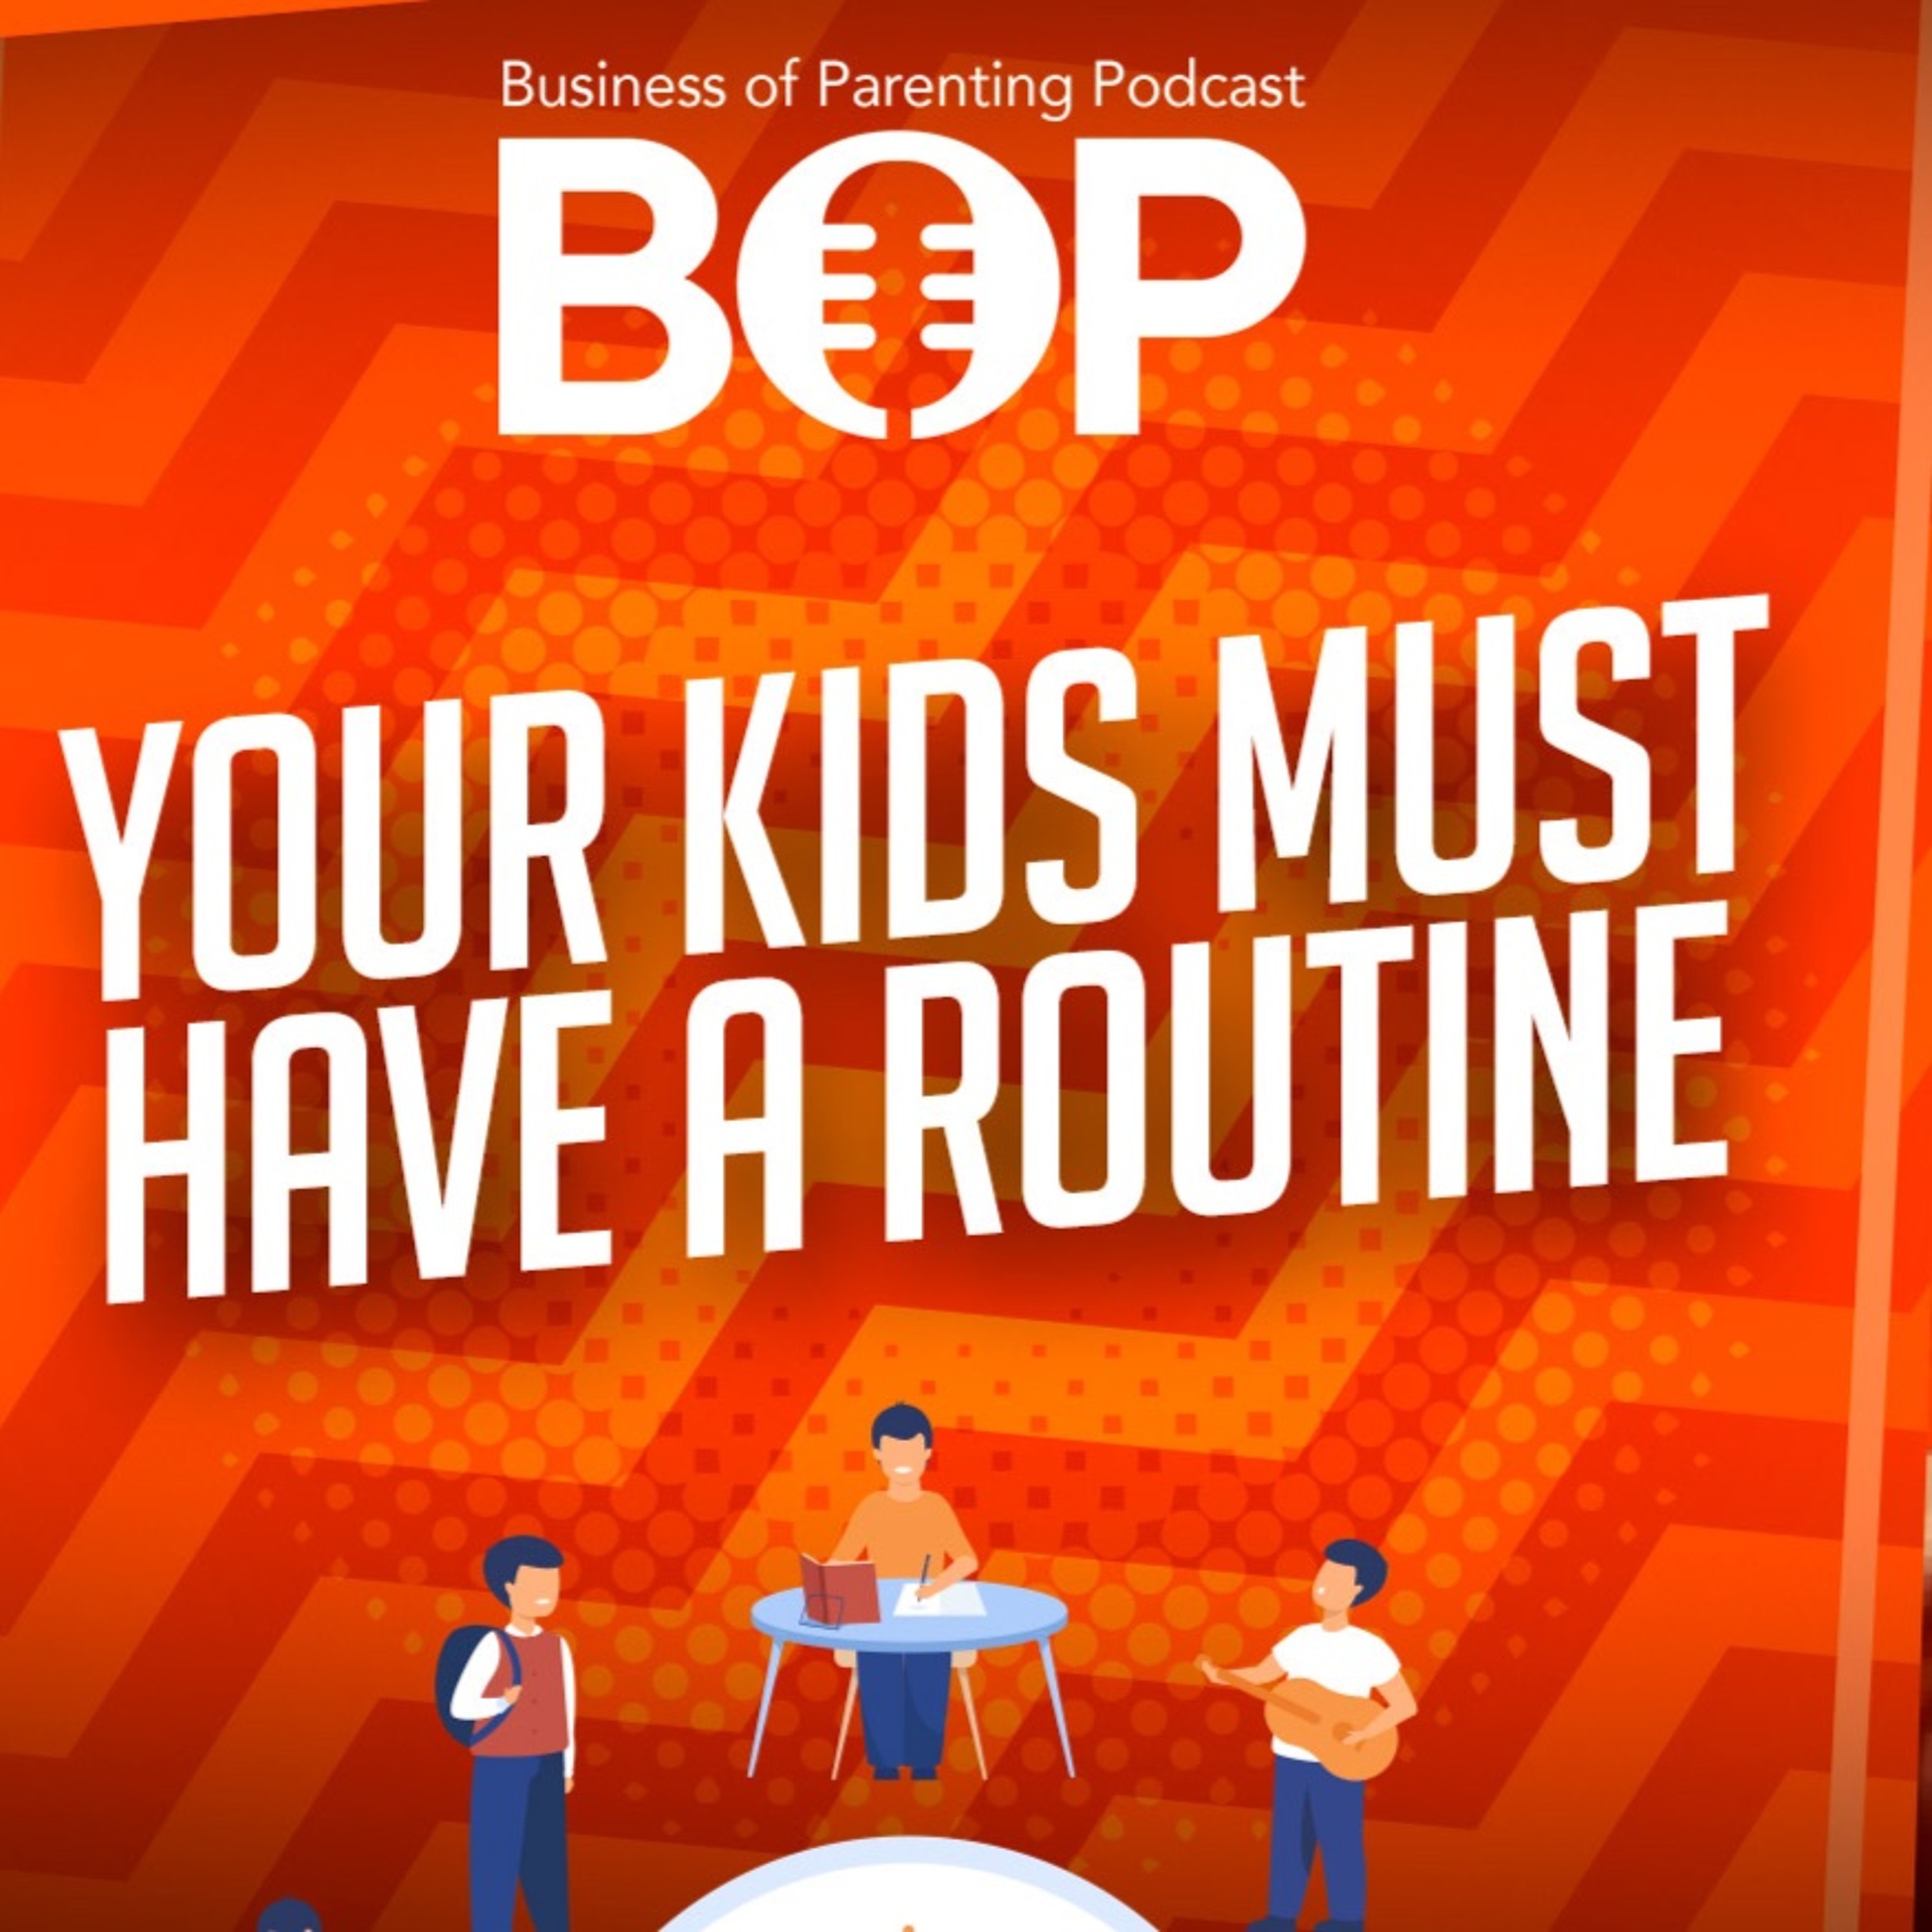 Your Kids Must Have A Routine ft. Durran Cage – Business of Parenting Podcast